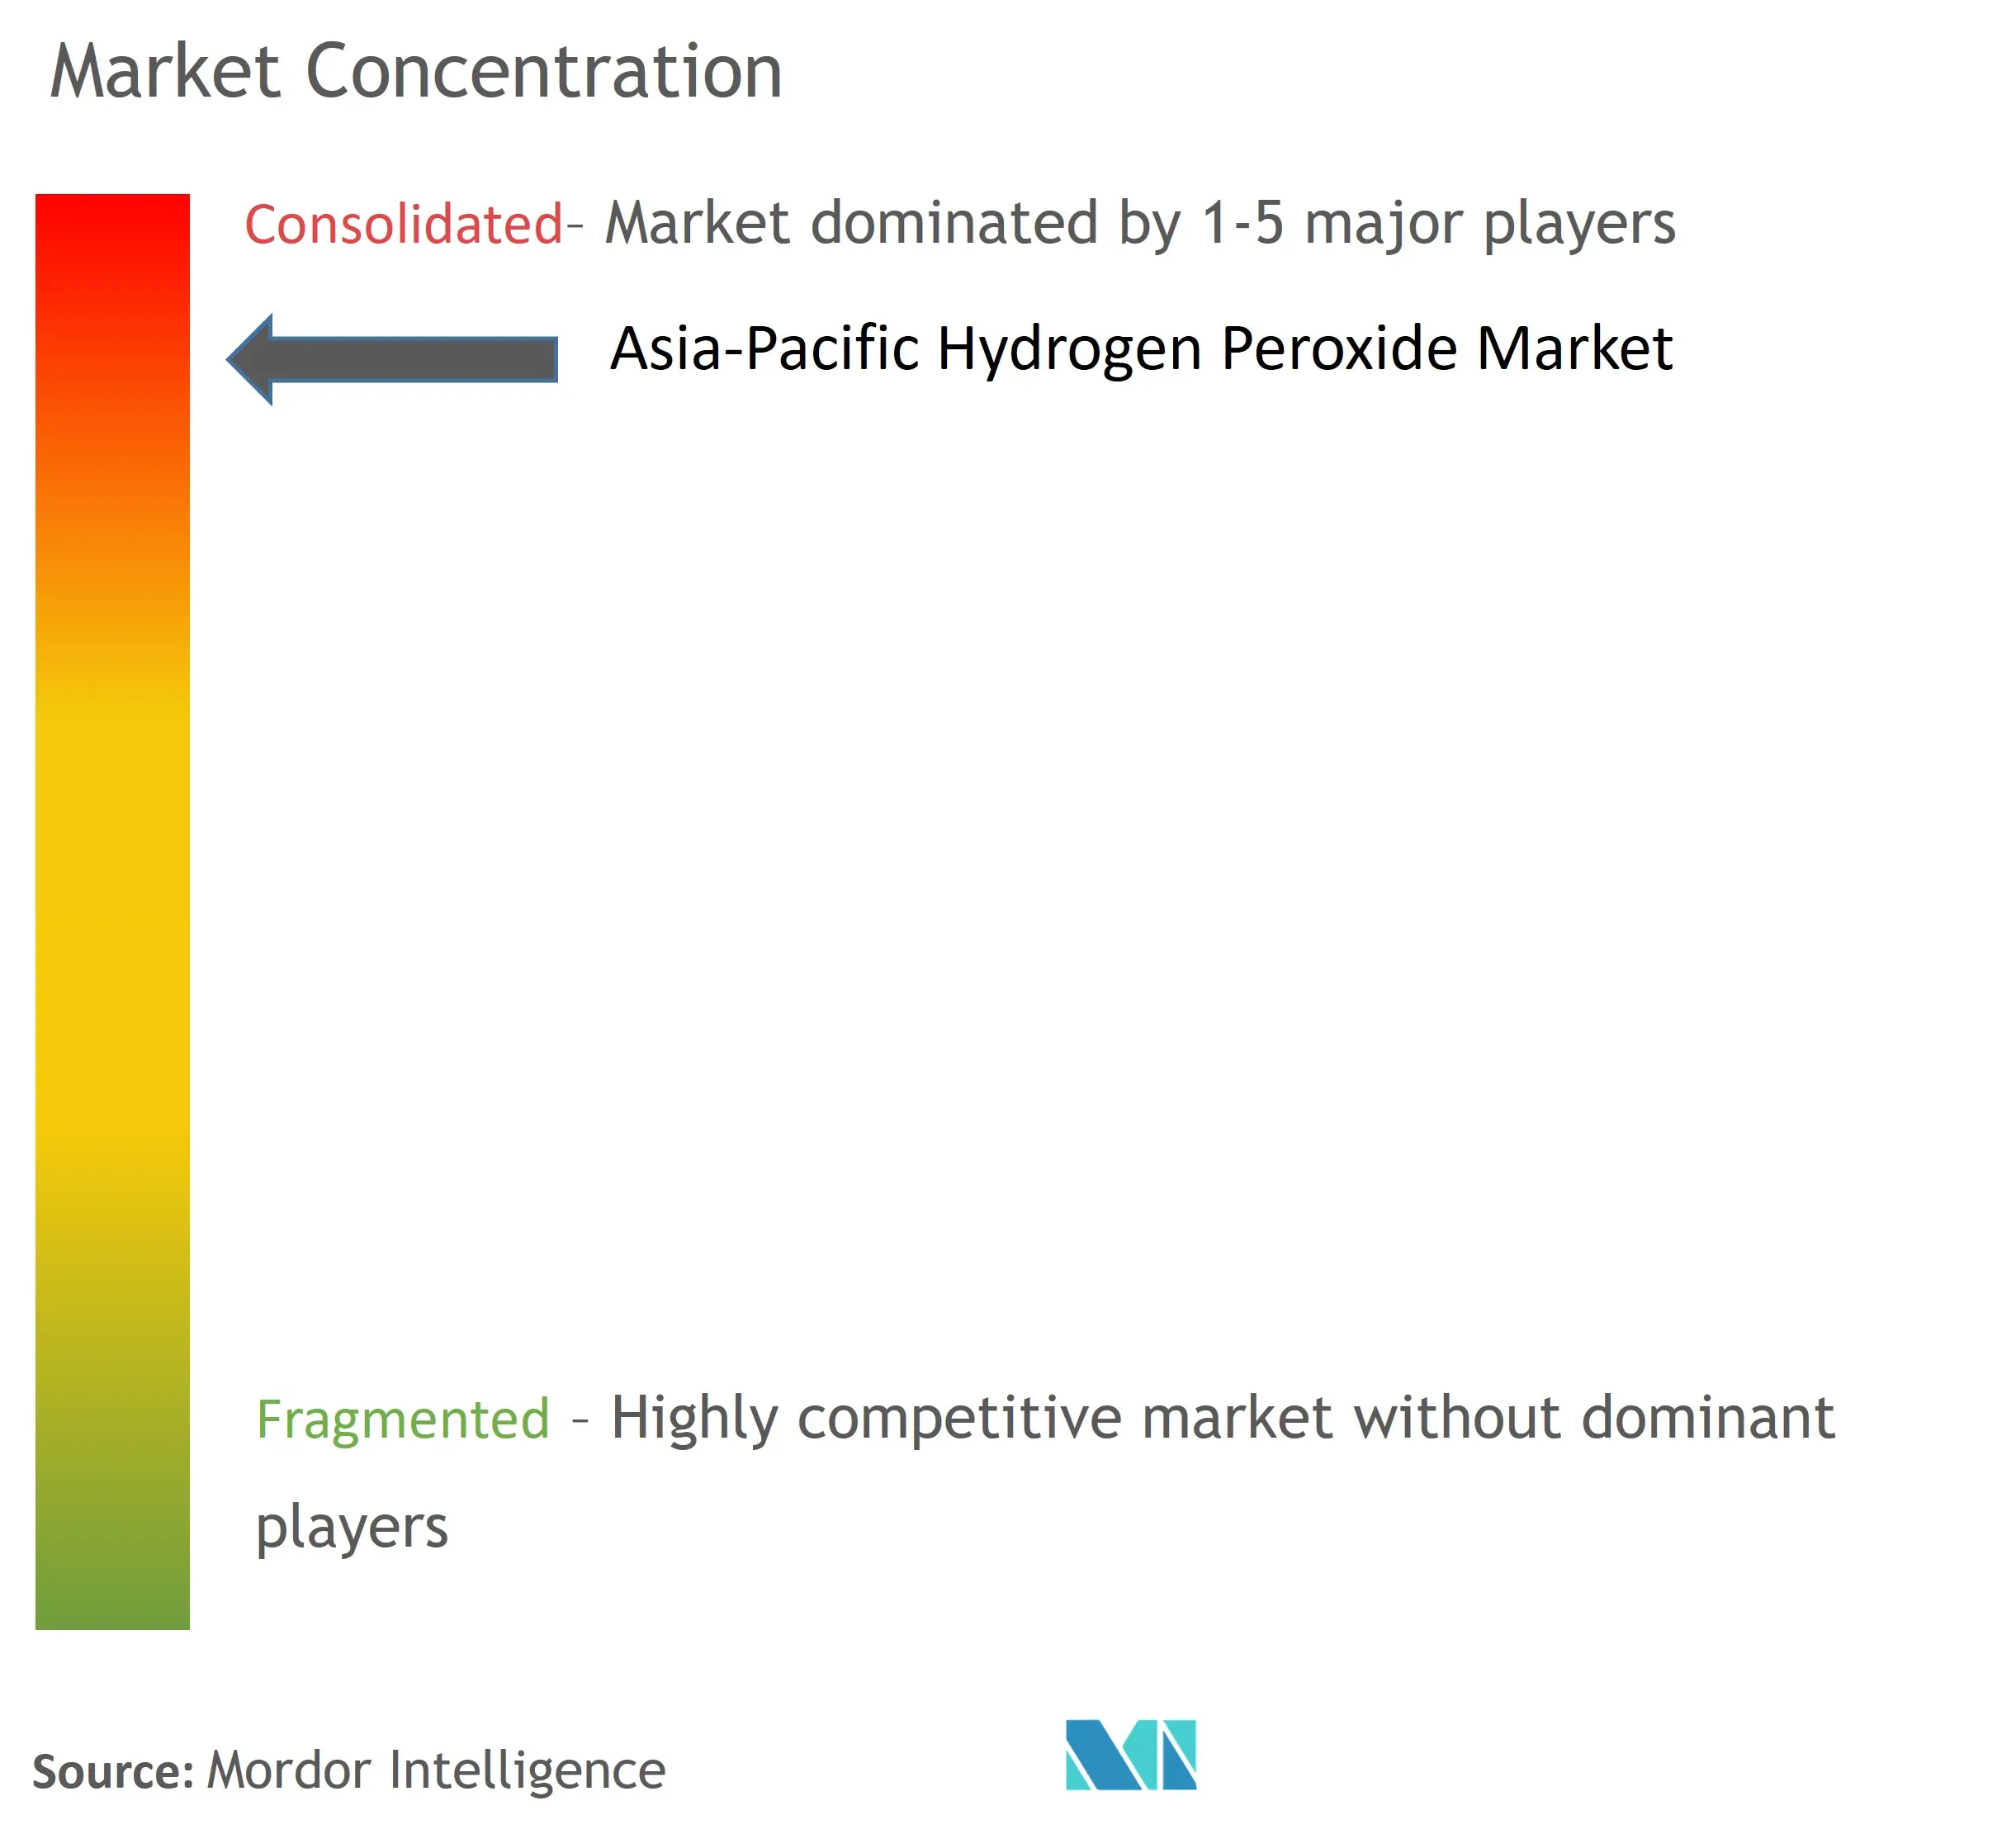 Asia-Pacific Hydrogen Peroxide Market  Concentration